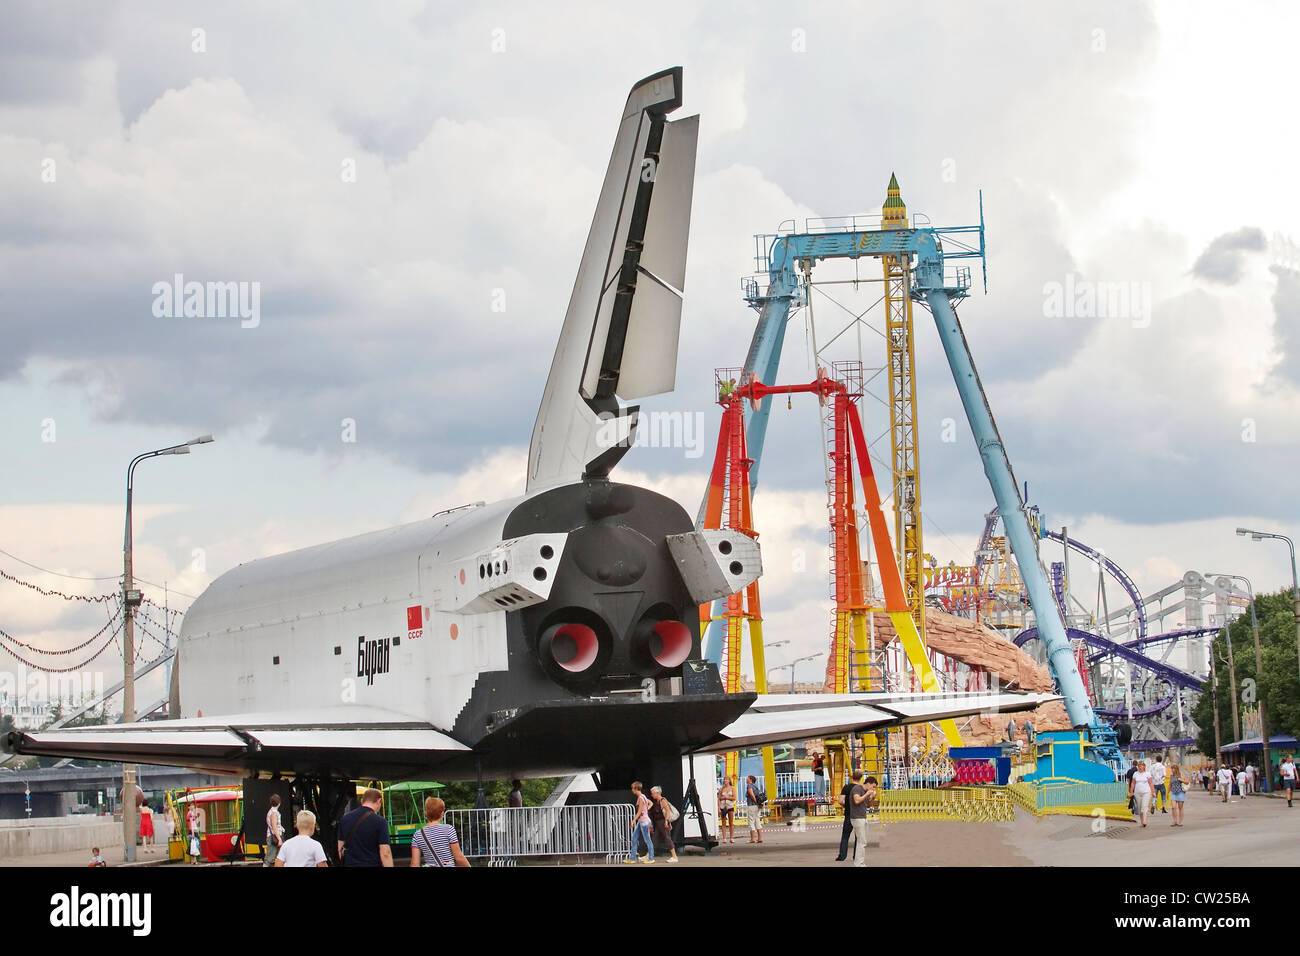 Shuttle 'BURAN' spacecraft in a Moscow park Stock Photo